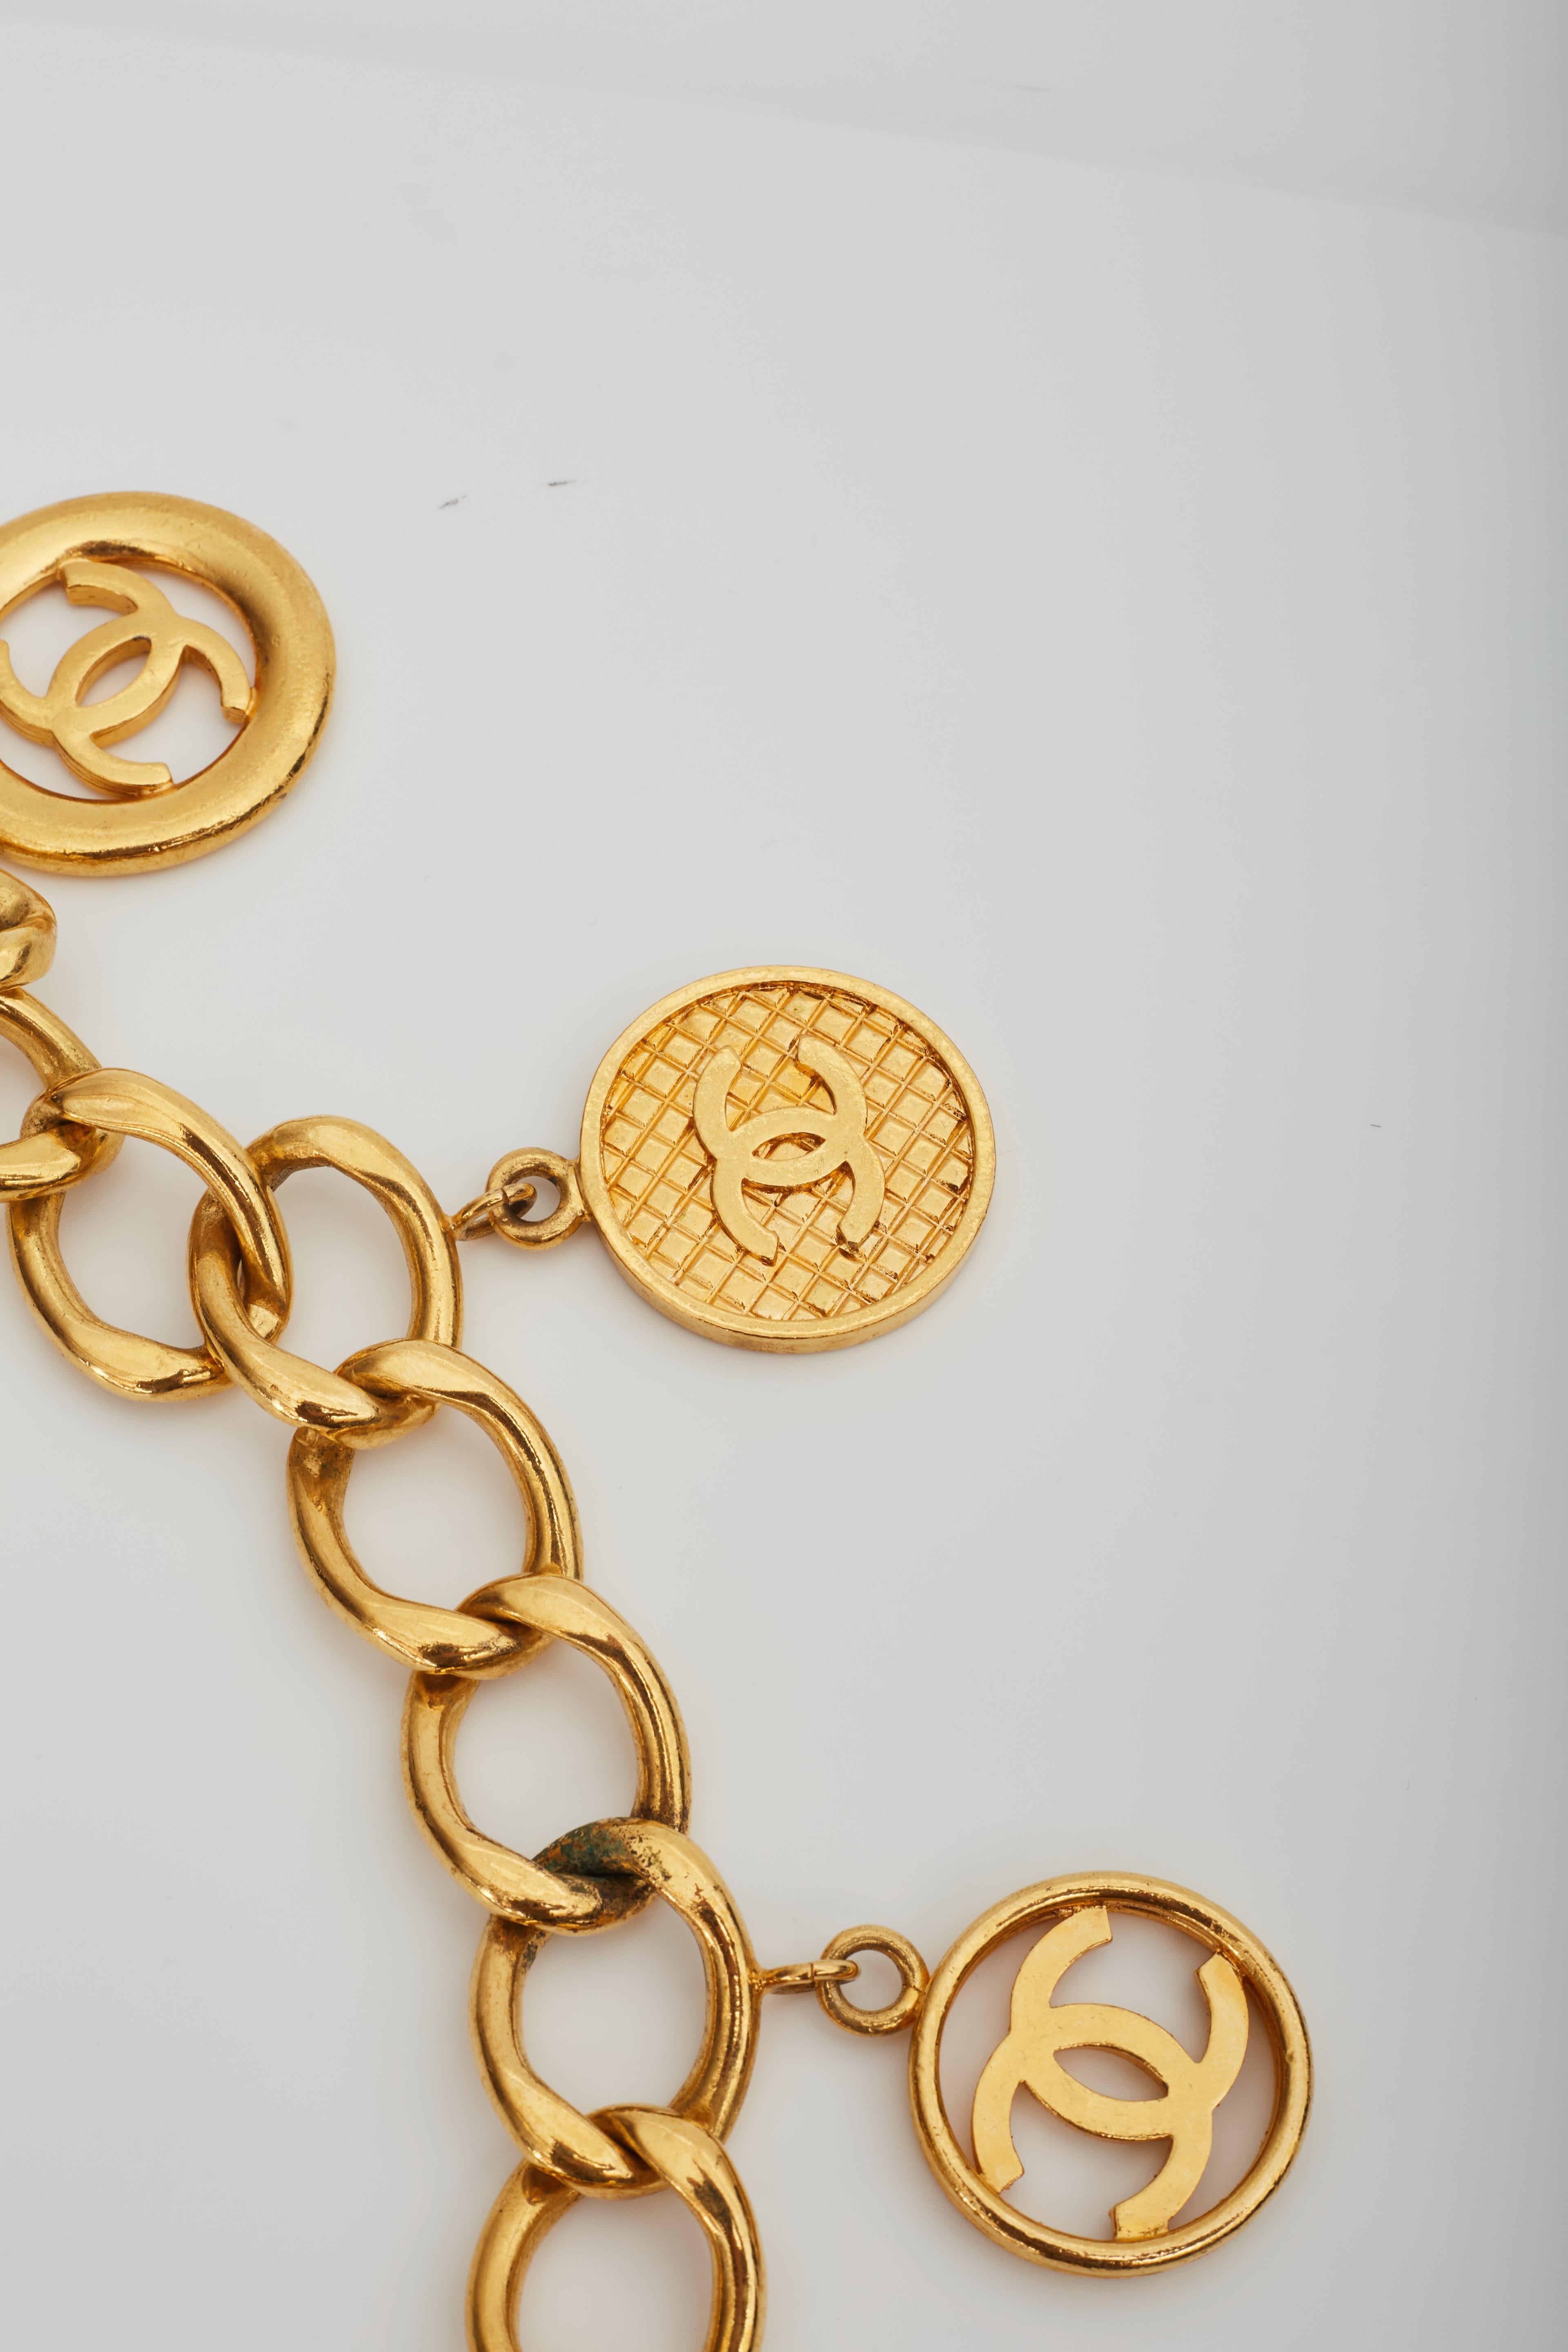 Chanel Logo Coin Medallion Charm Gold Chain Necklace Belt (1993) 26inch 5